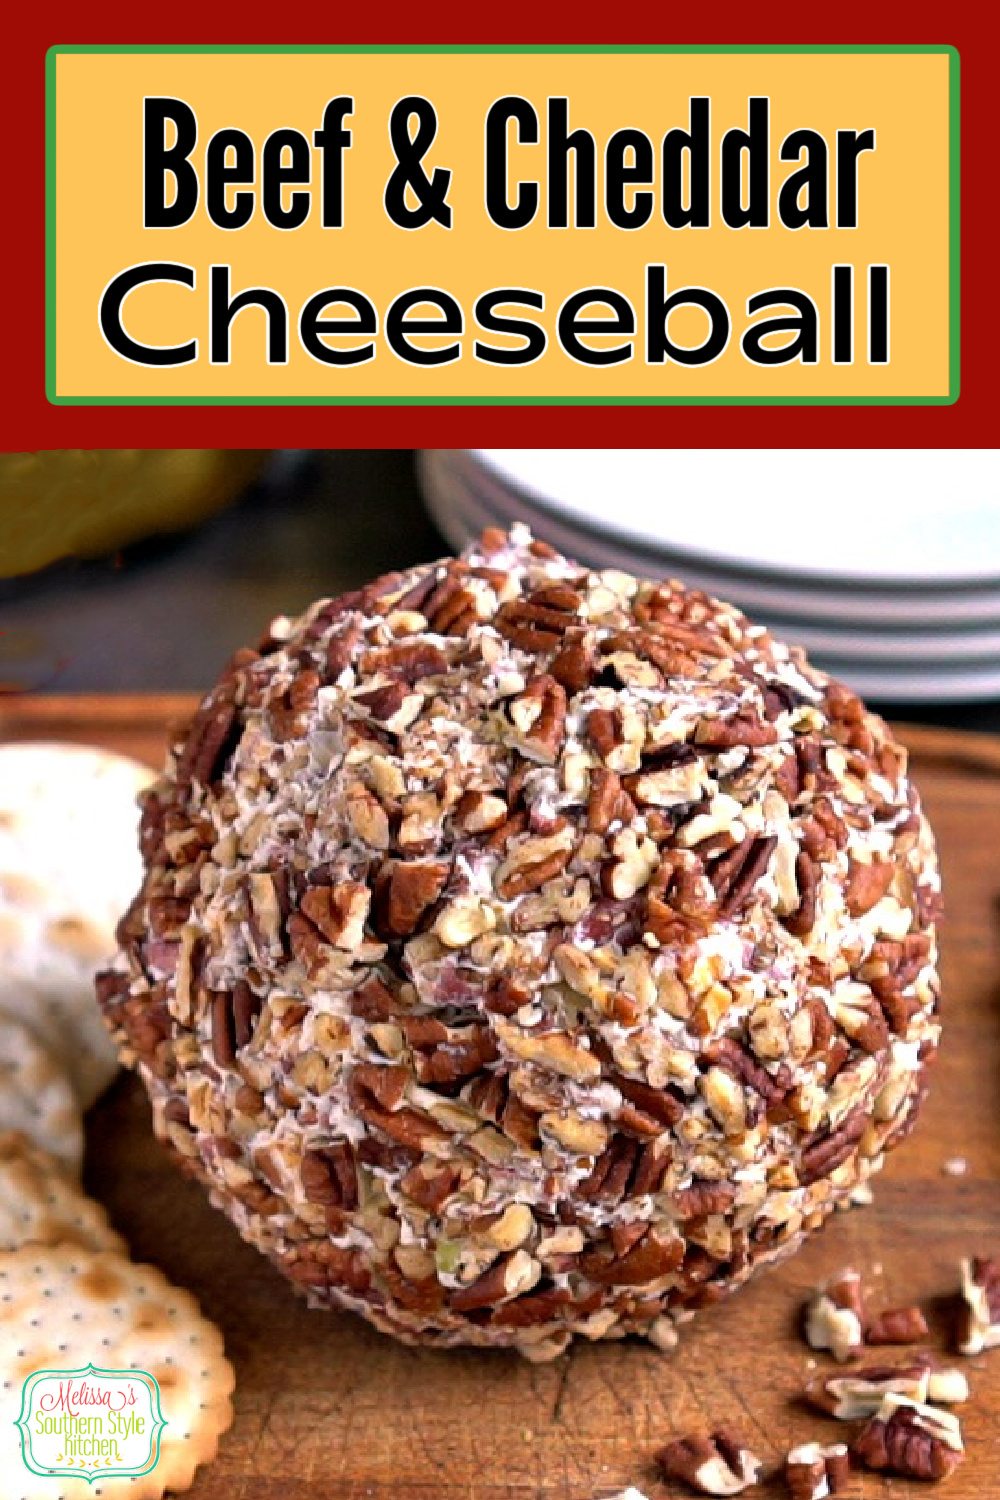 Beef and Cheddar Cheeseball is ideal for any occasion when delicious make-ahead starters are on the menu #beefandcheddarcheeseball #cheeseball #beefcheeseballreipes #holidayappetizers #easyappetizers #beef #footballsnacks #cheddarcheeseballs #easyrecipes #southernfood #southernrecipes via @melissasssk